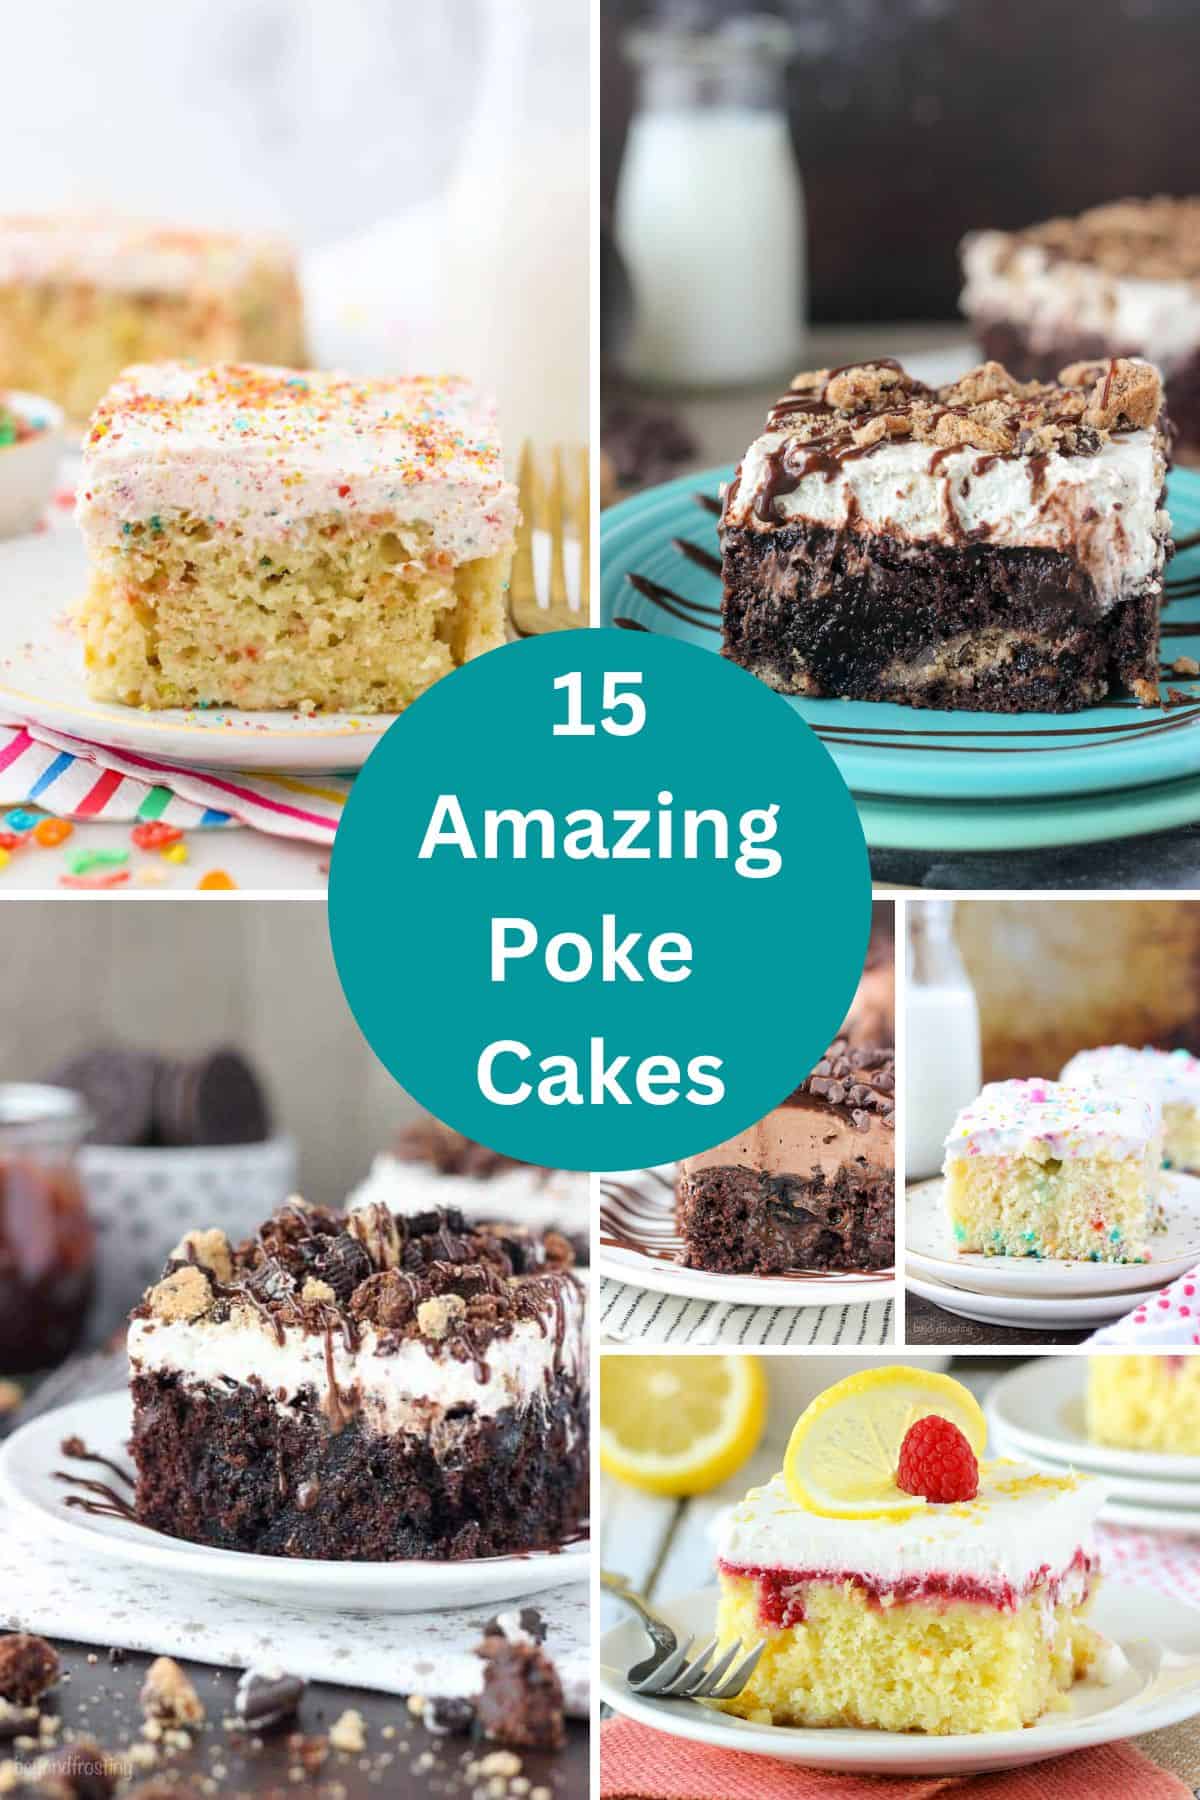 Collage image of 6 different poke cake with text overlay